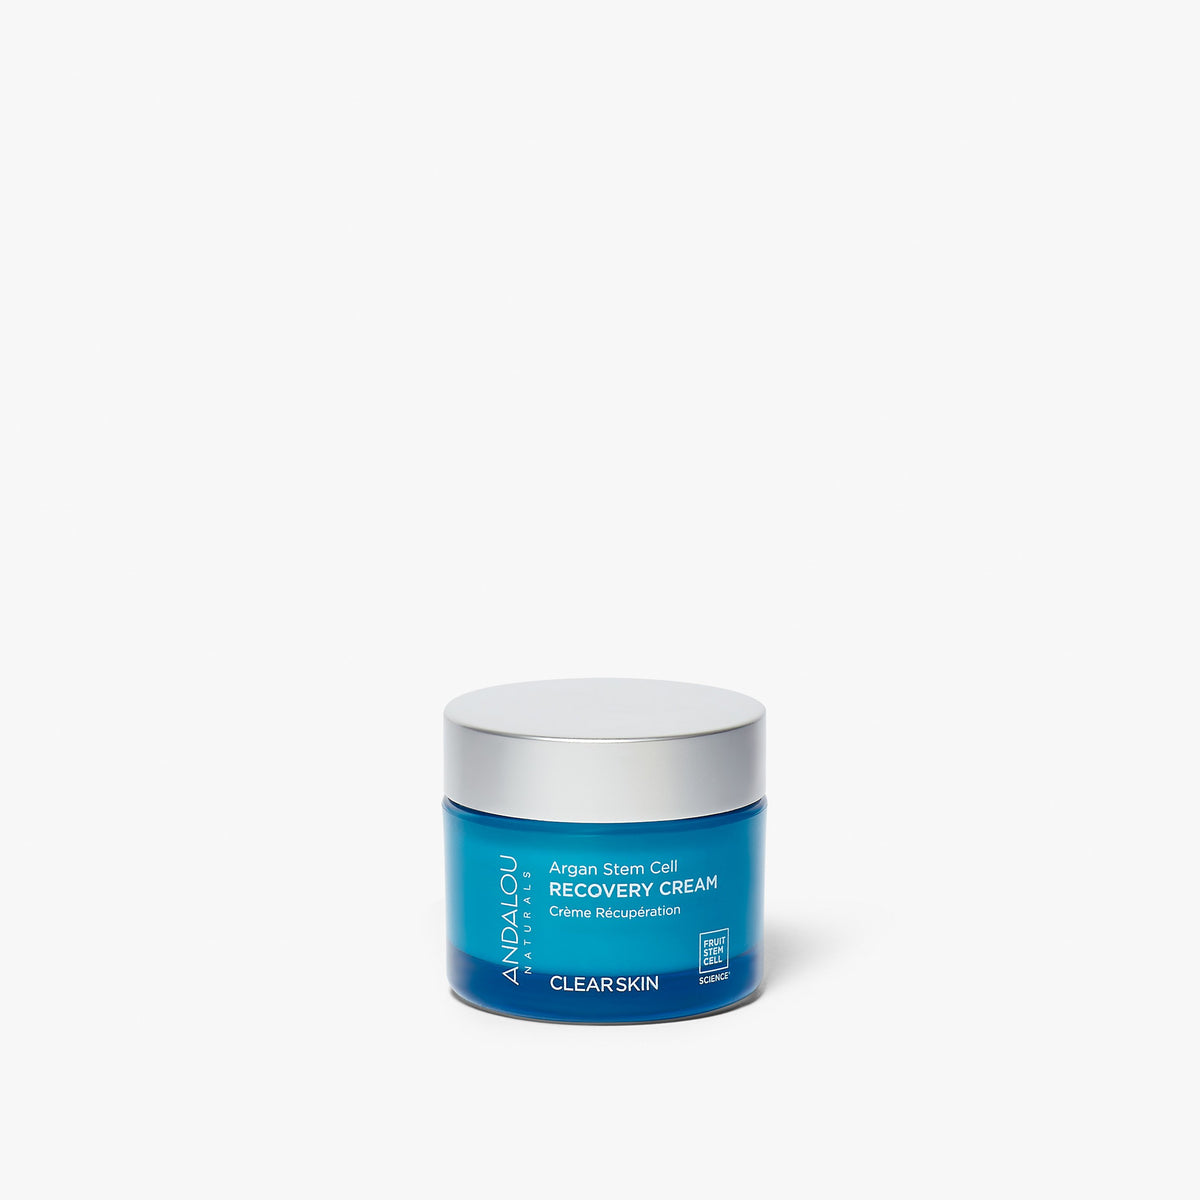 Clear Skin Argan Stem Cell Recovery Cream - Andalou Naturals US